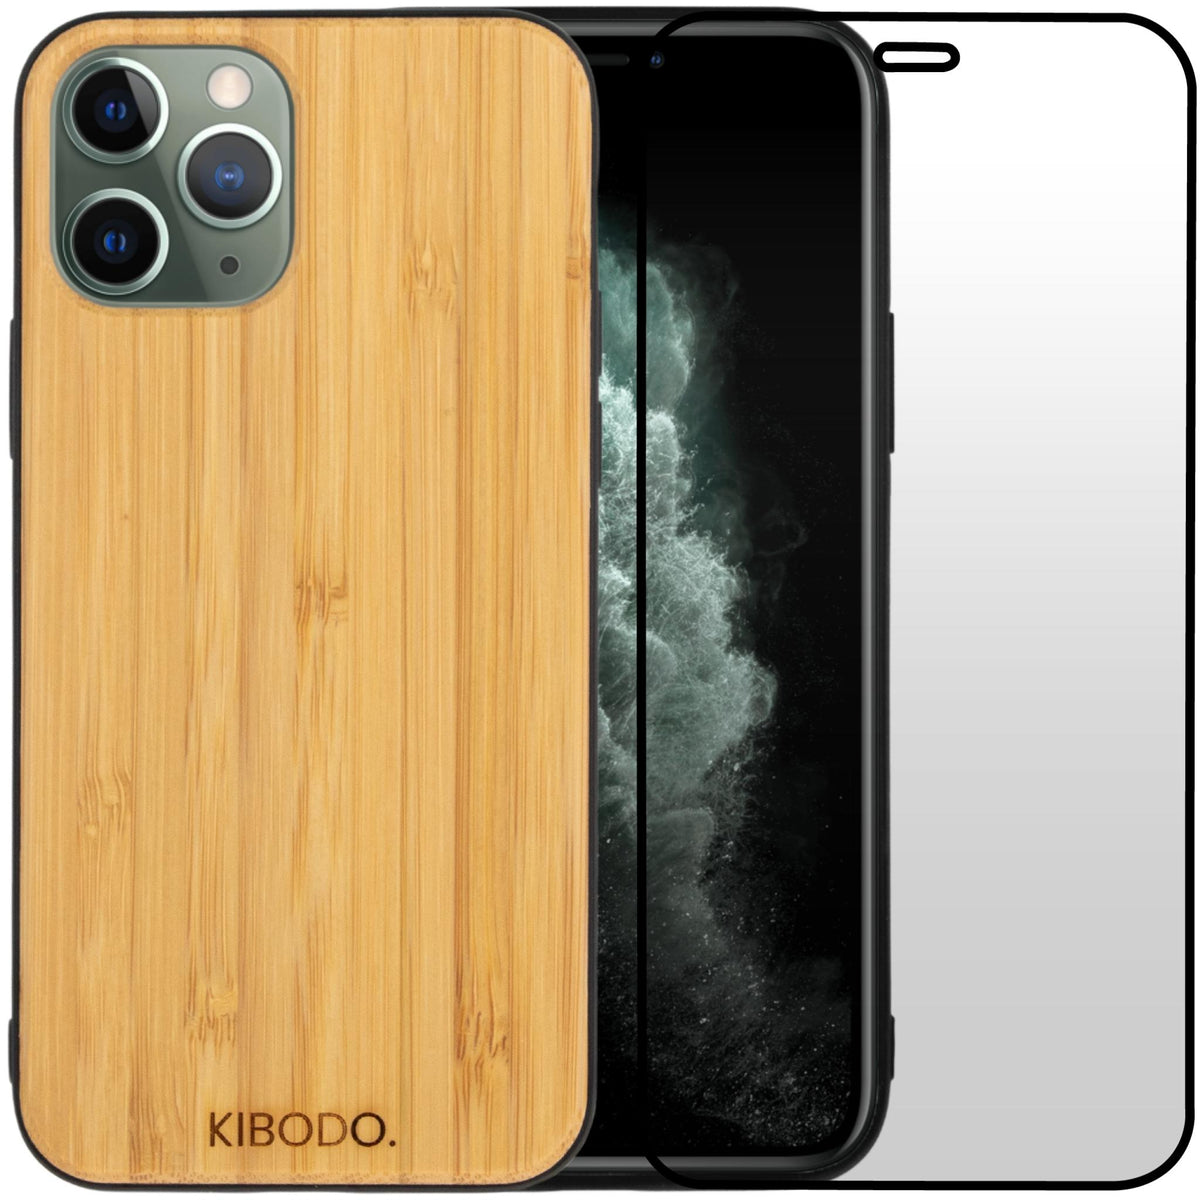 iPhone 11 Pro Wooden Case + Screen Protector